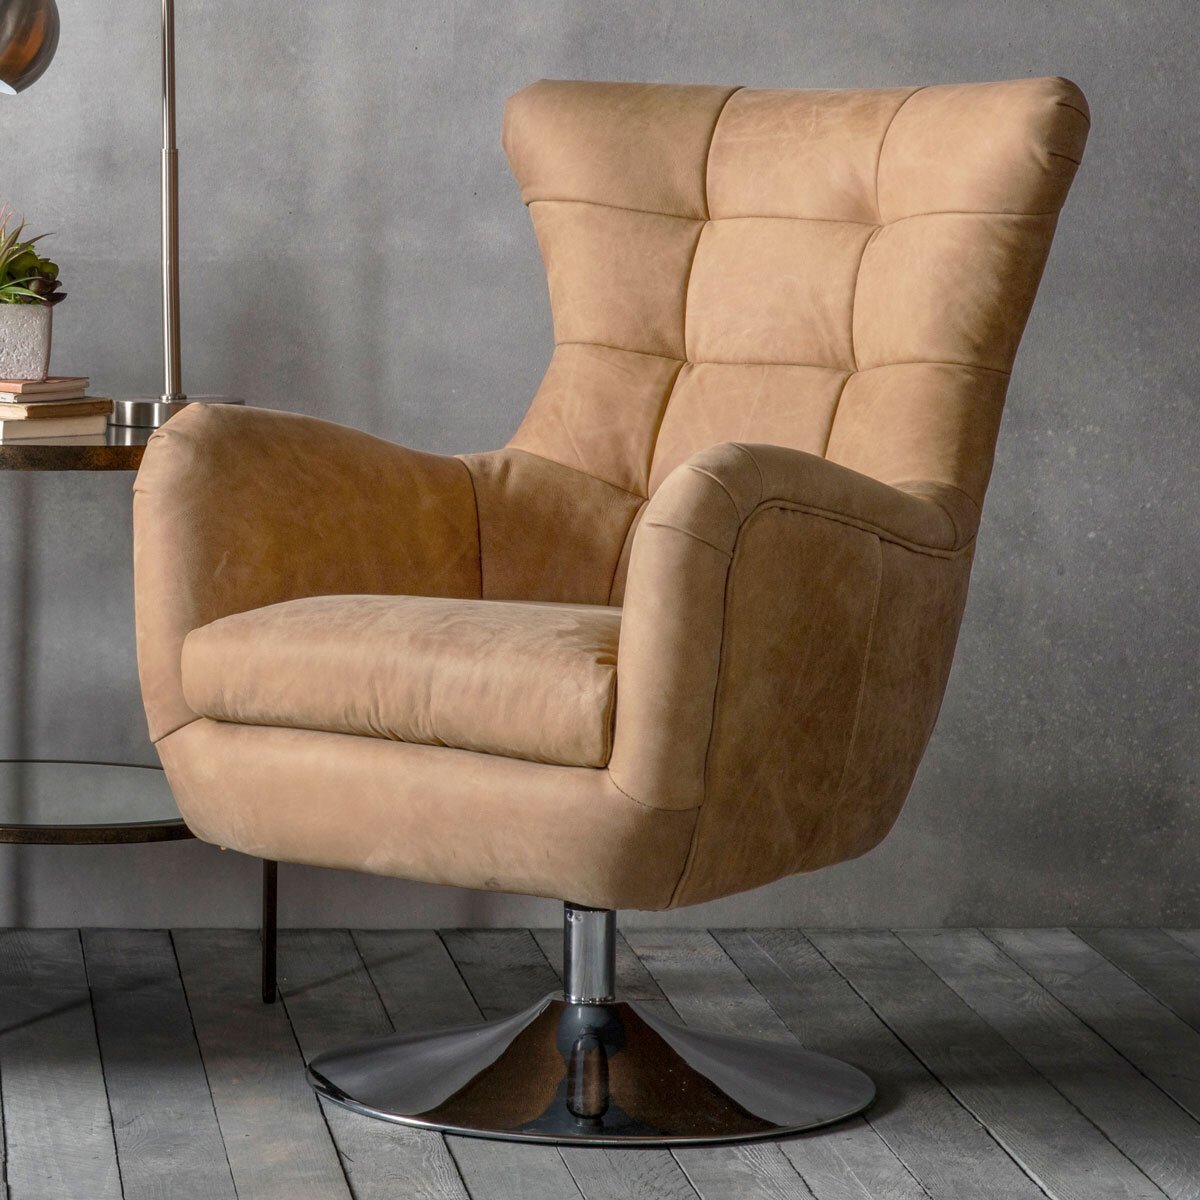 Gallery Newport Top Grain Leather Swivel Chair, Saddle Tan - Signature Retail Stores